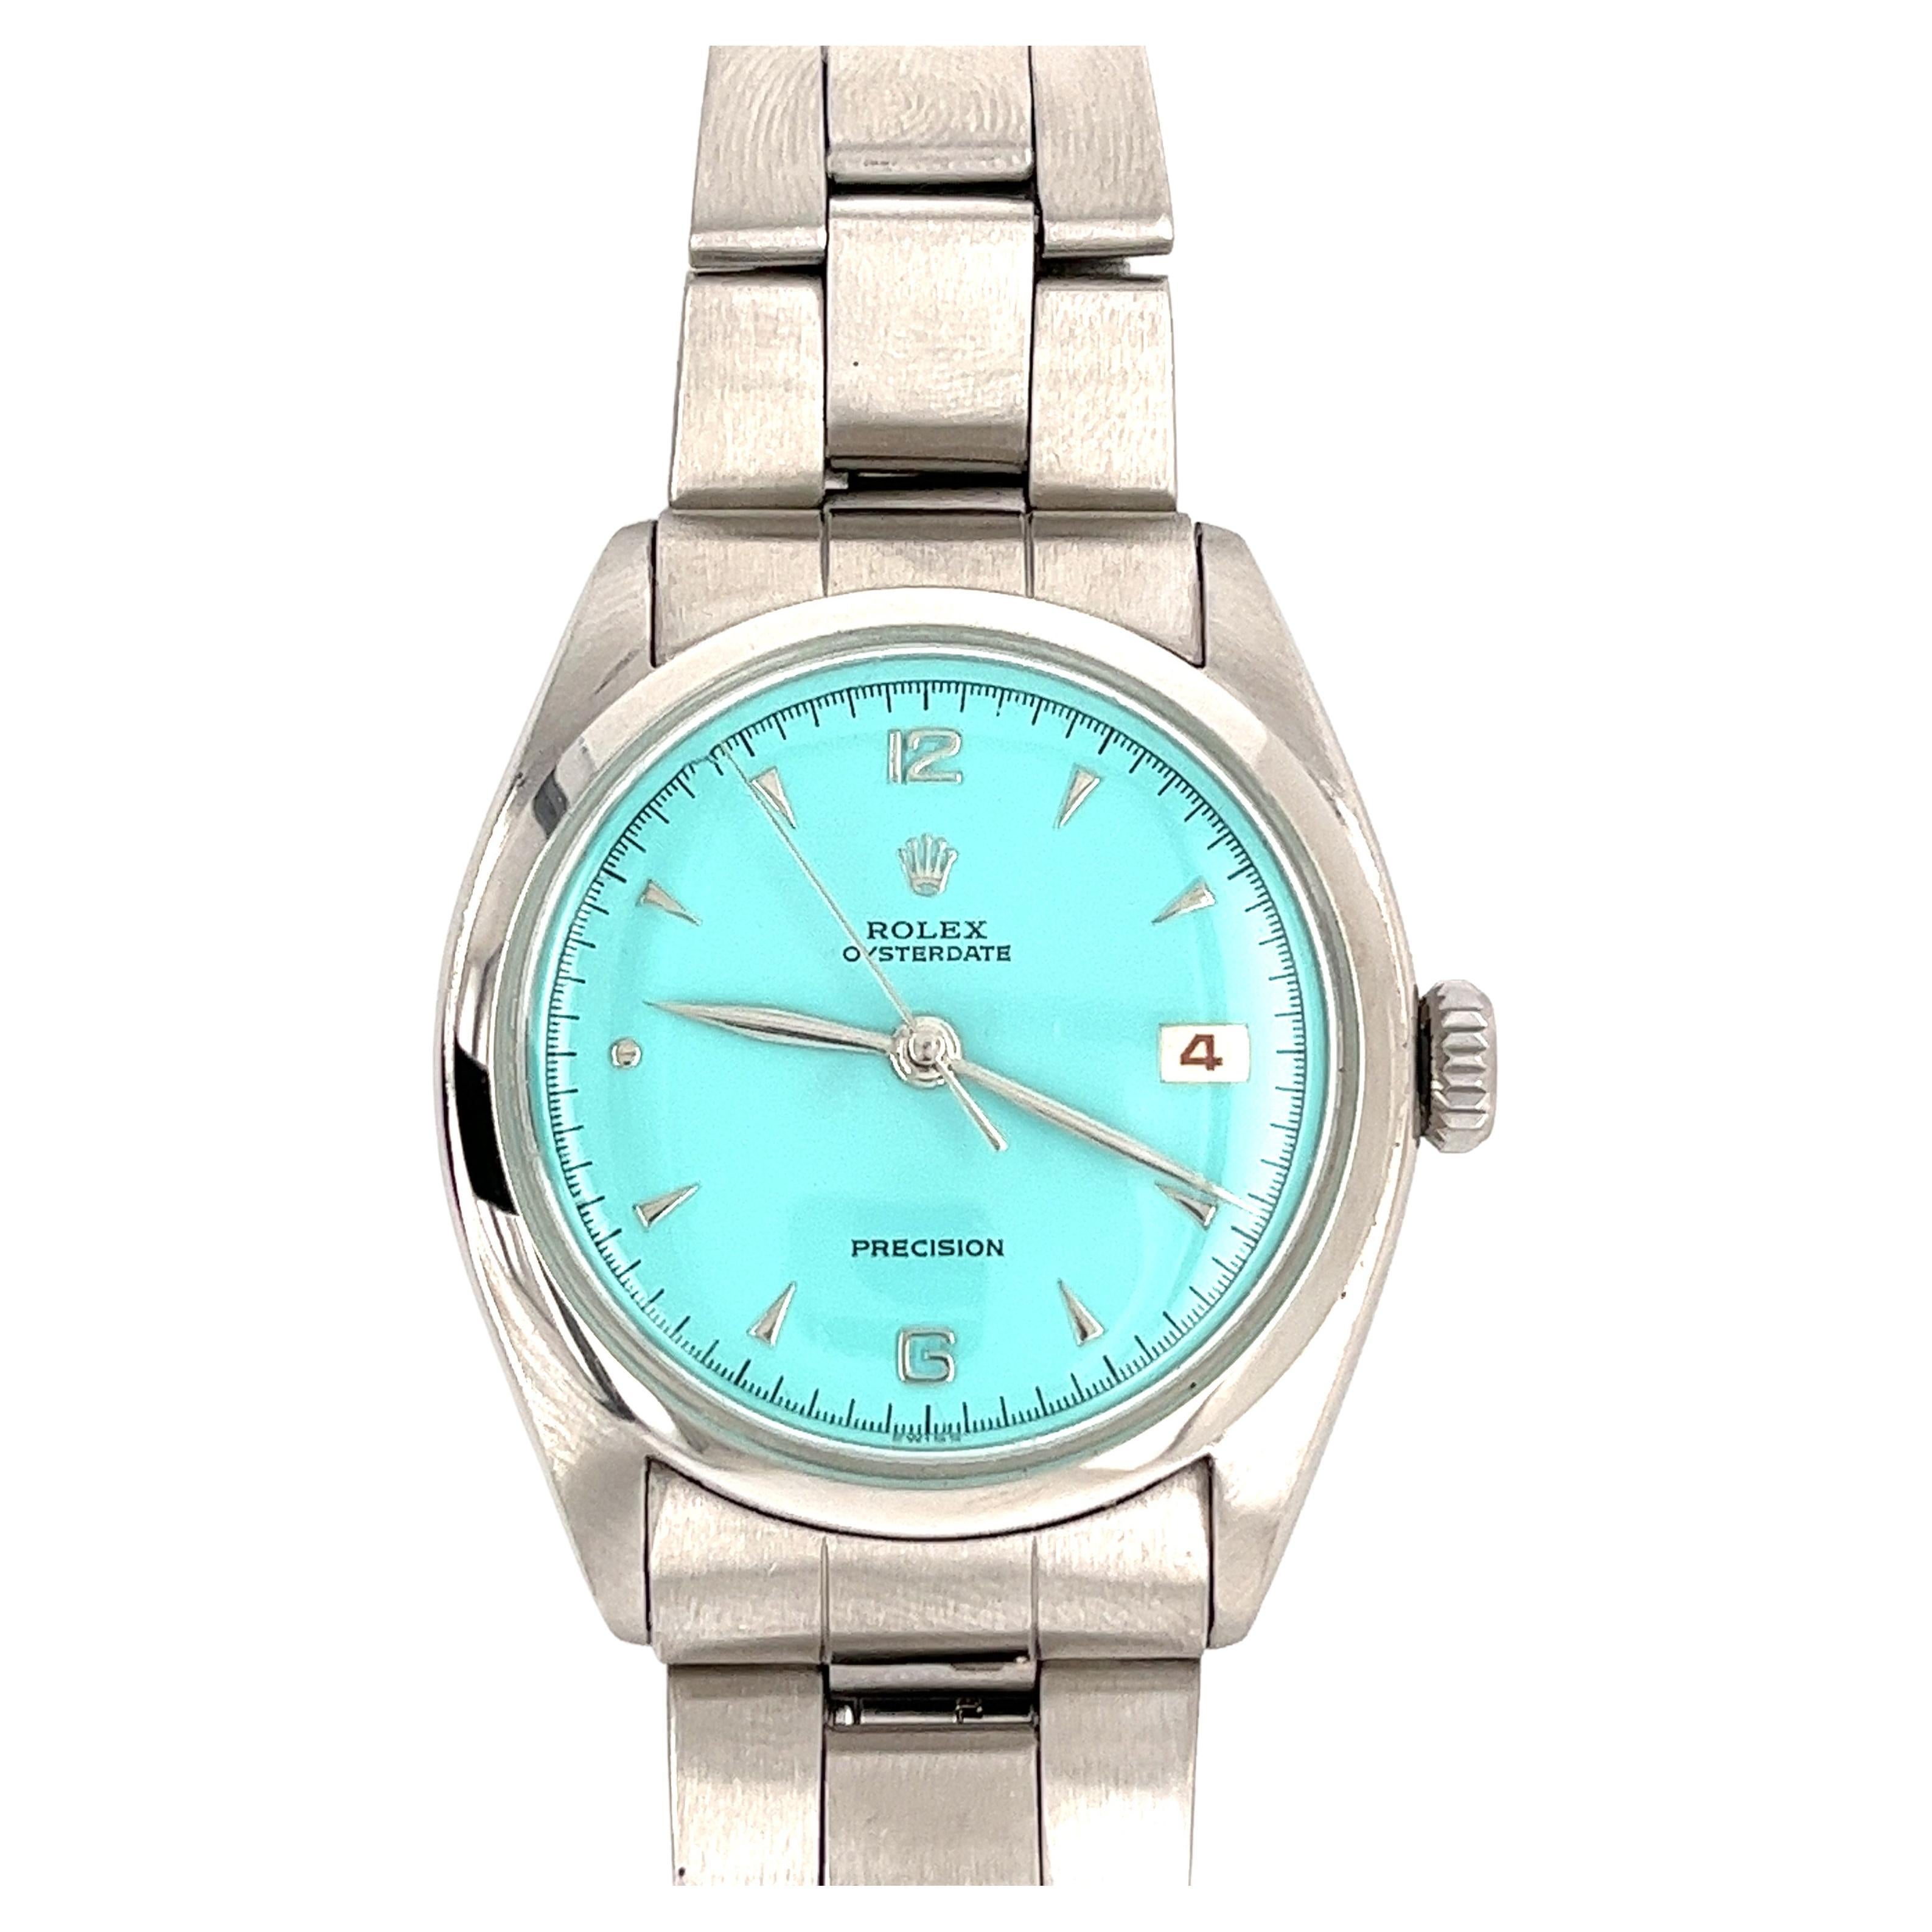 Rolex Tiffany Blue Oyster Date Precision Vintage 1963 For Sale at 1stDibs |  rolex with tiffany blue face, tiffany rolex, tiffany blue rolex